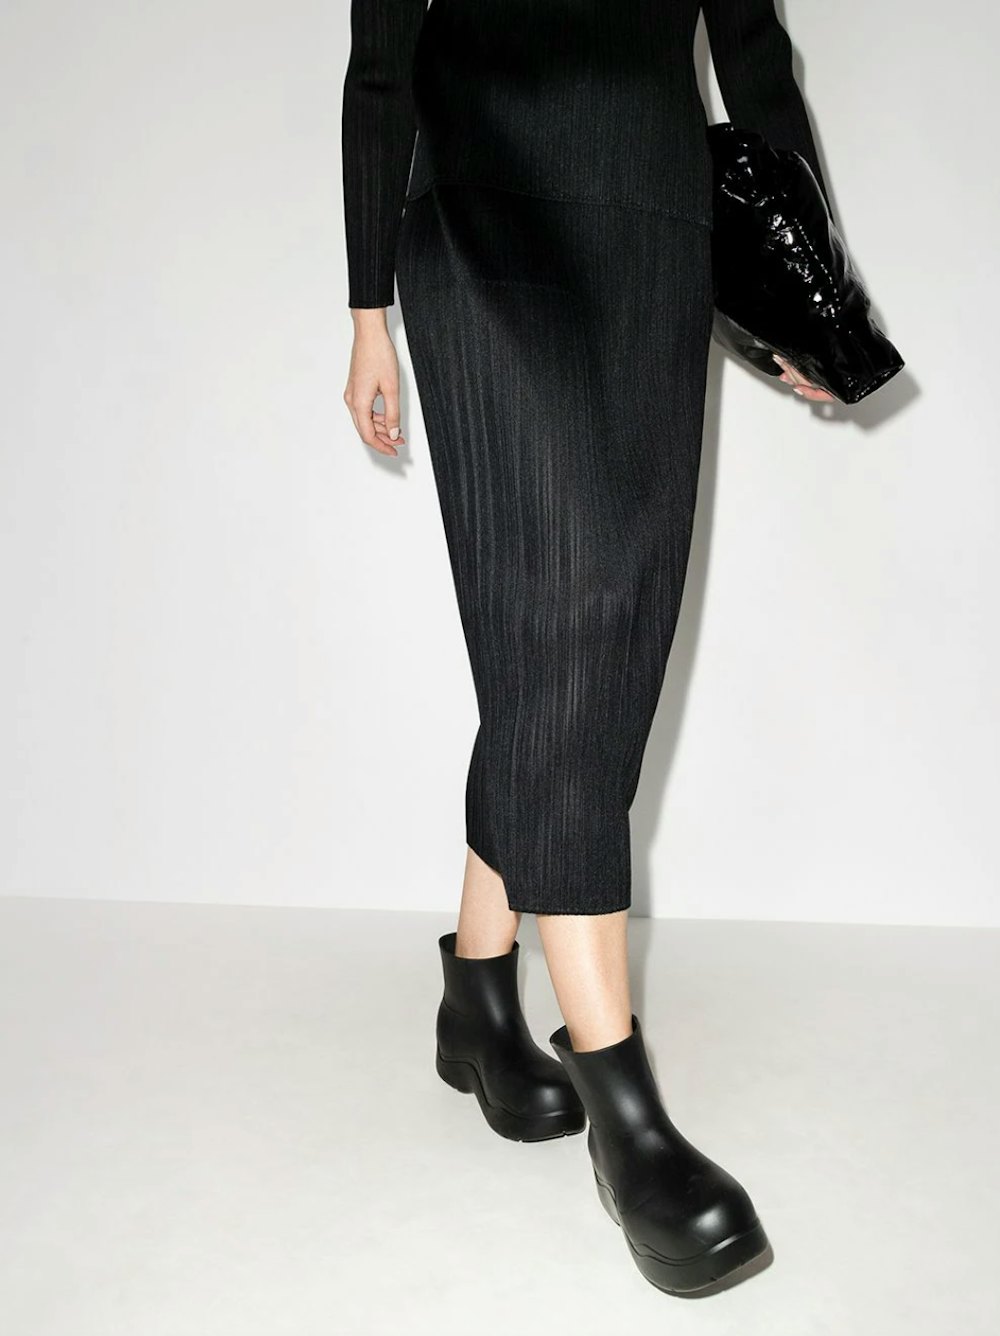 Micropleats- Issey Miyake Pleats Please Trend